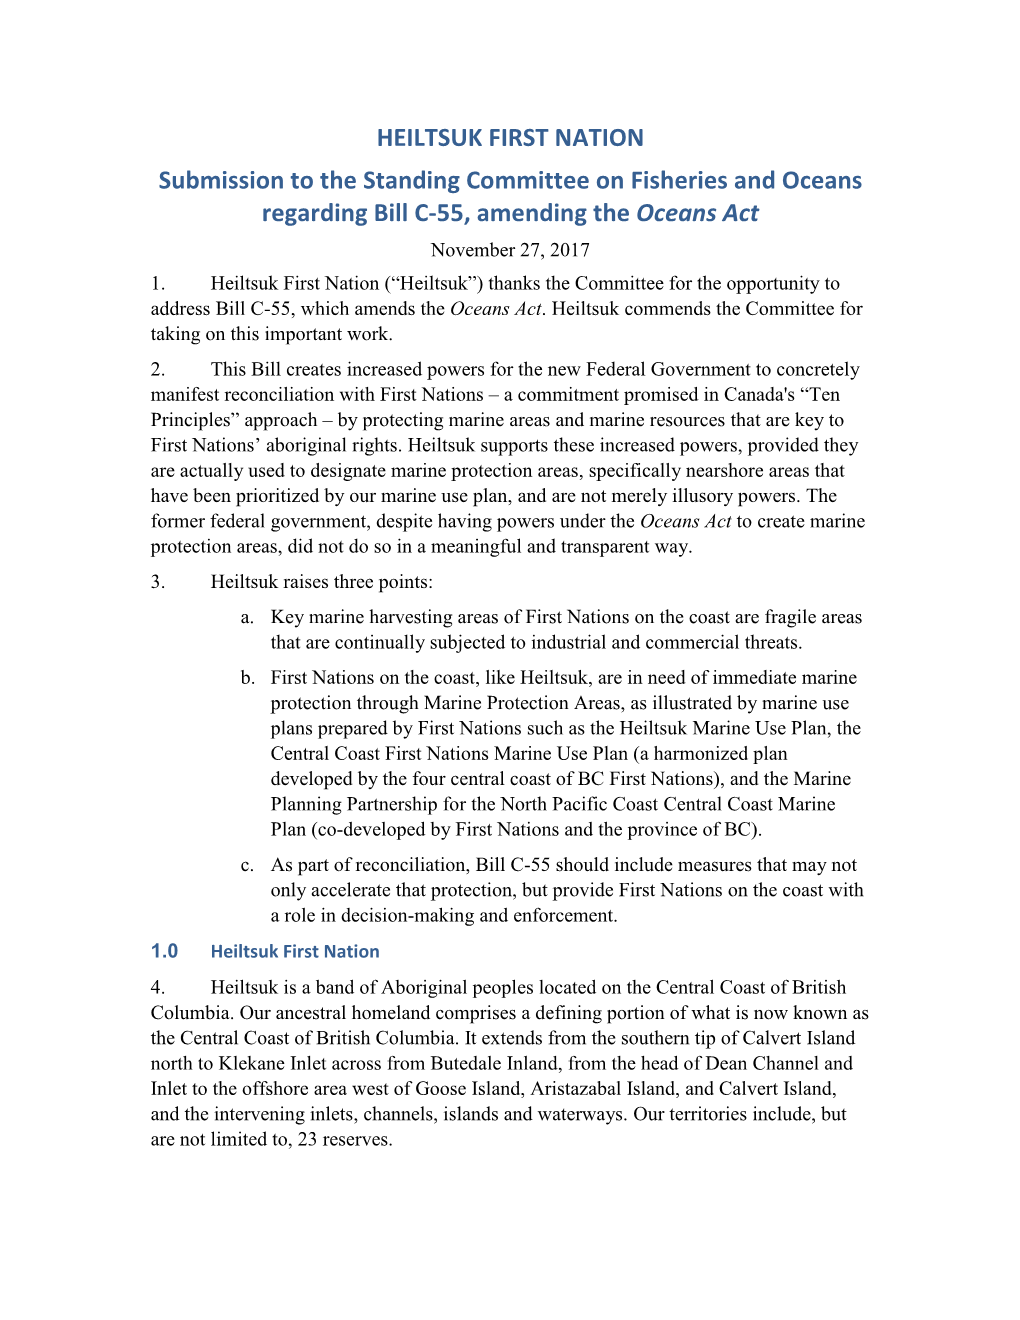 HEILTSUK FIRST NATION Submission to the Standing Committee on Fisheries and Oceans Regarding Bill C-55, Amending the Oceans Act November 27, 2017 1